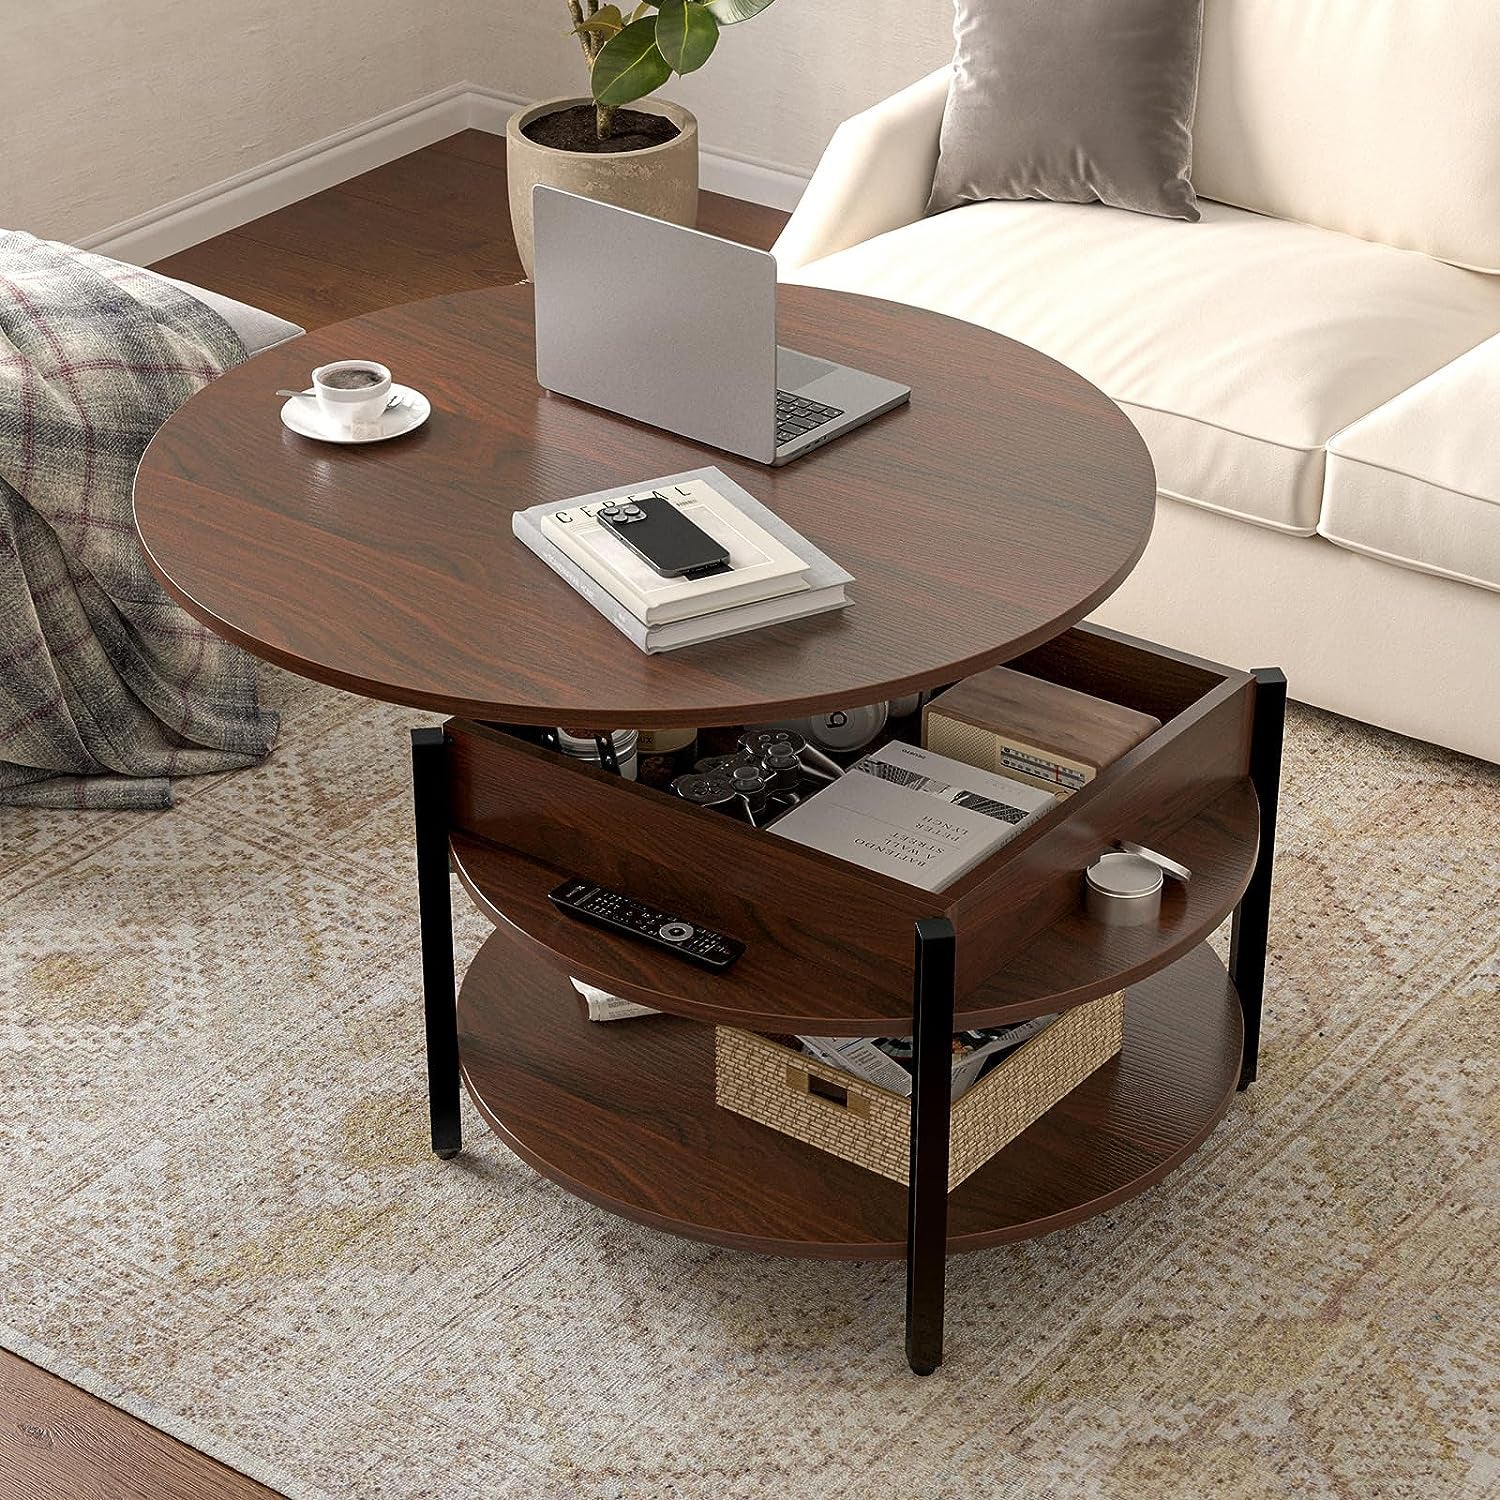 30 Best Coffee Tables With Storage Built In